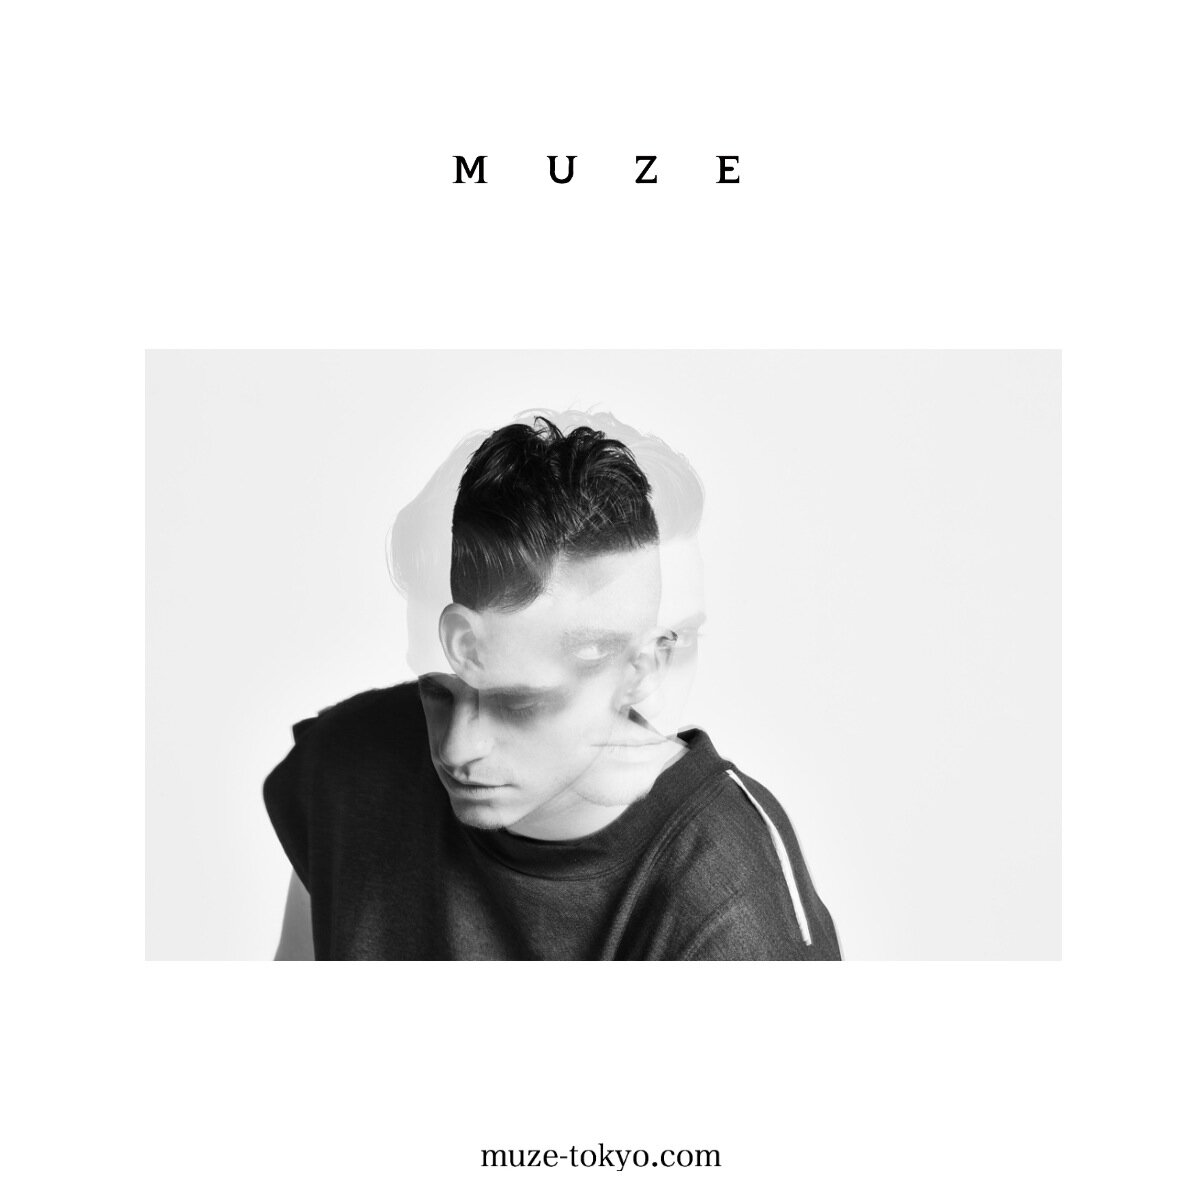 MUZE FASHION LABEL. Brand in pursuit to become iconic man of the times. https://t.co/hJSgxOXNbw